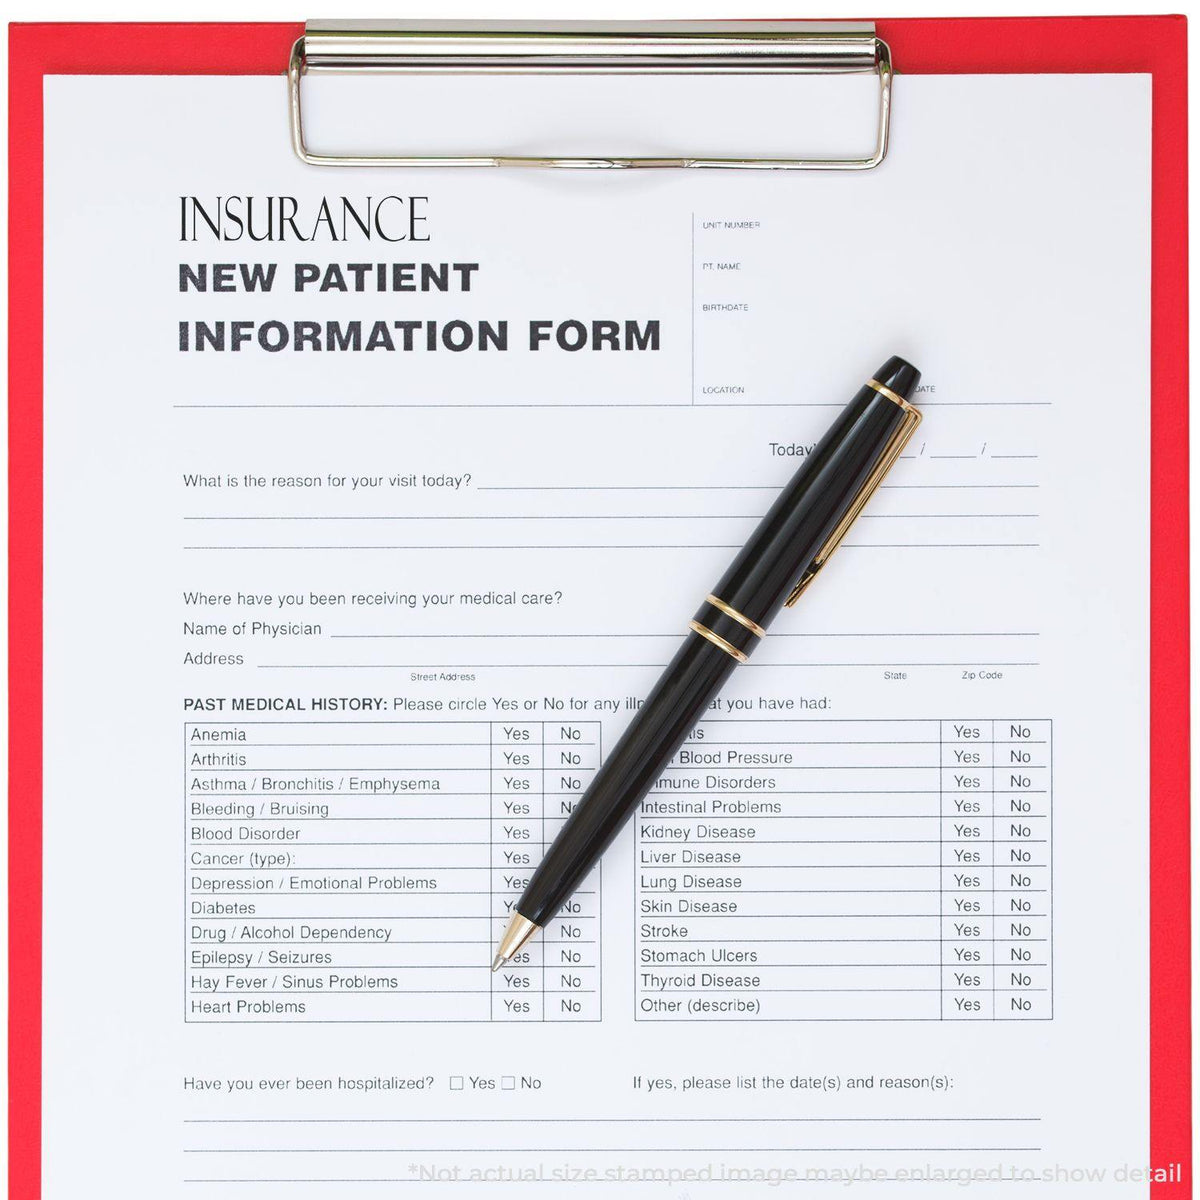 In Use Large Insurance Rubber Stamp Image